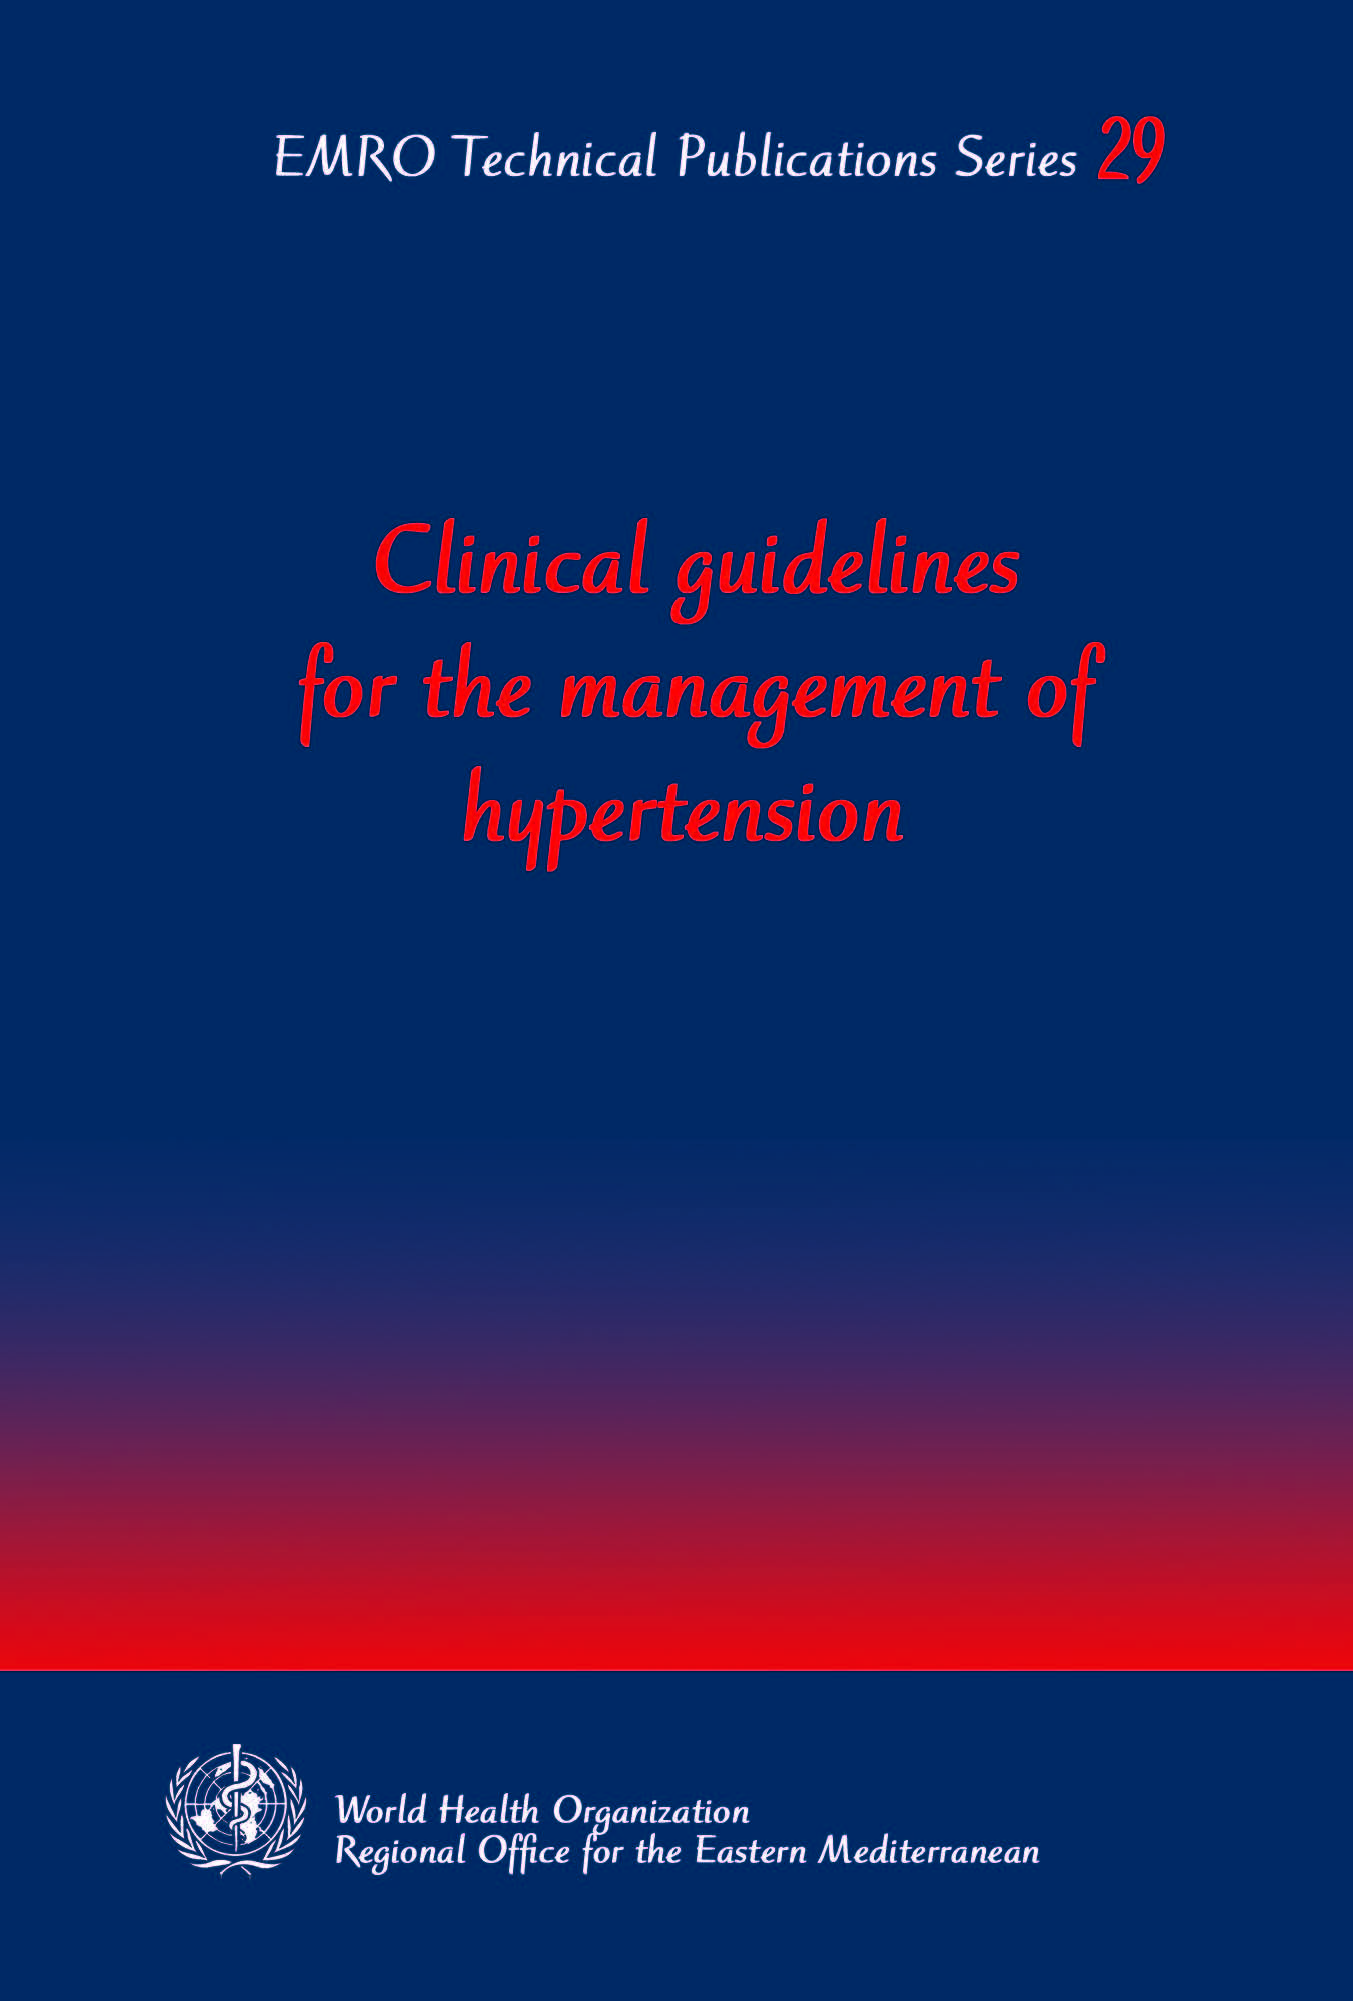 Clinical guidelines on hypertension